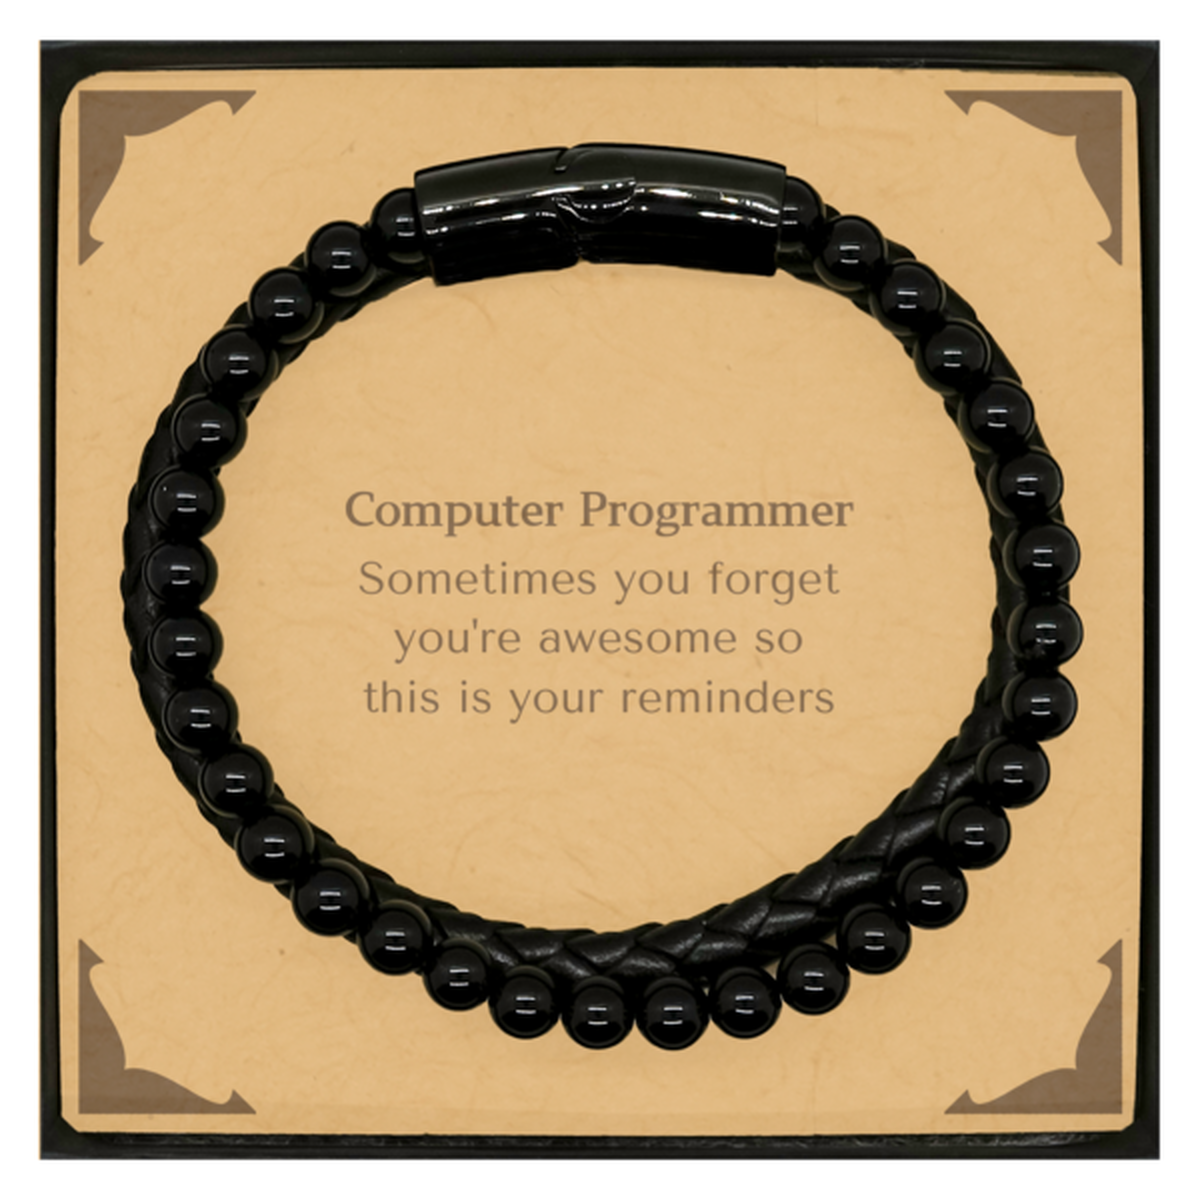 Sentimental Computer Programmer Stone Leather Bracelets, Computer Programmer Sometimes you forget you're awesome so this is your reminders, Graduation Christmas Birthday Gifts for Computer Programmer, Men, Women, Coworkers